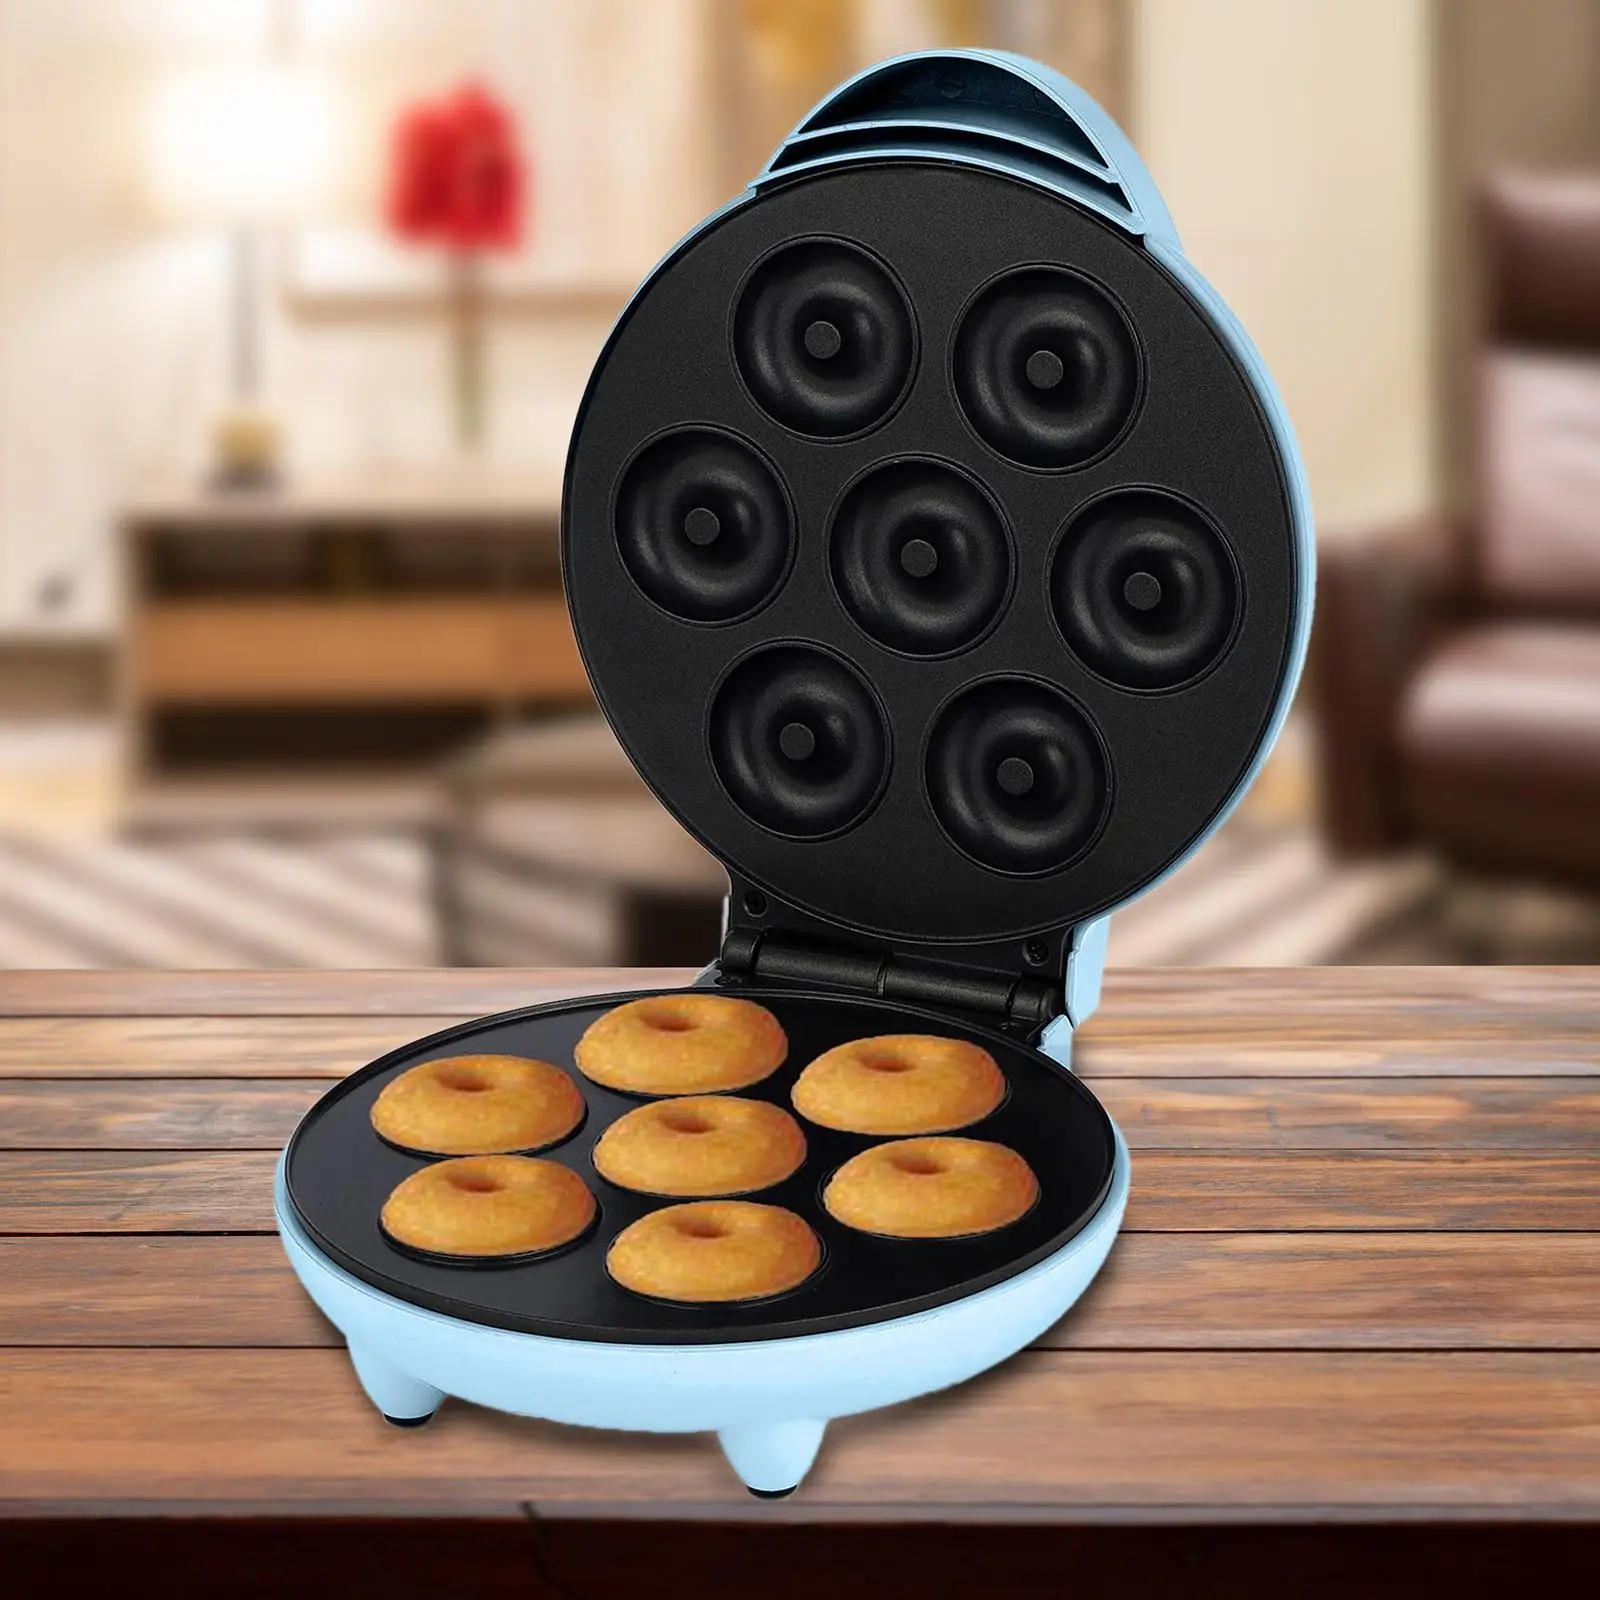 Mini Donut Maker Machine Waffle Iron with Reminder Light 1000W Easy to Use Pancake Machine for Commercial Use Home Bakery Snack